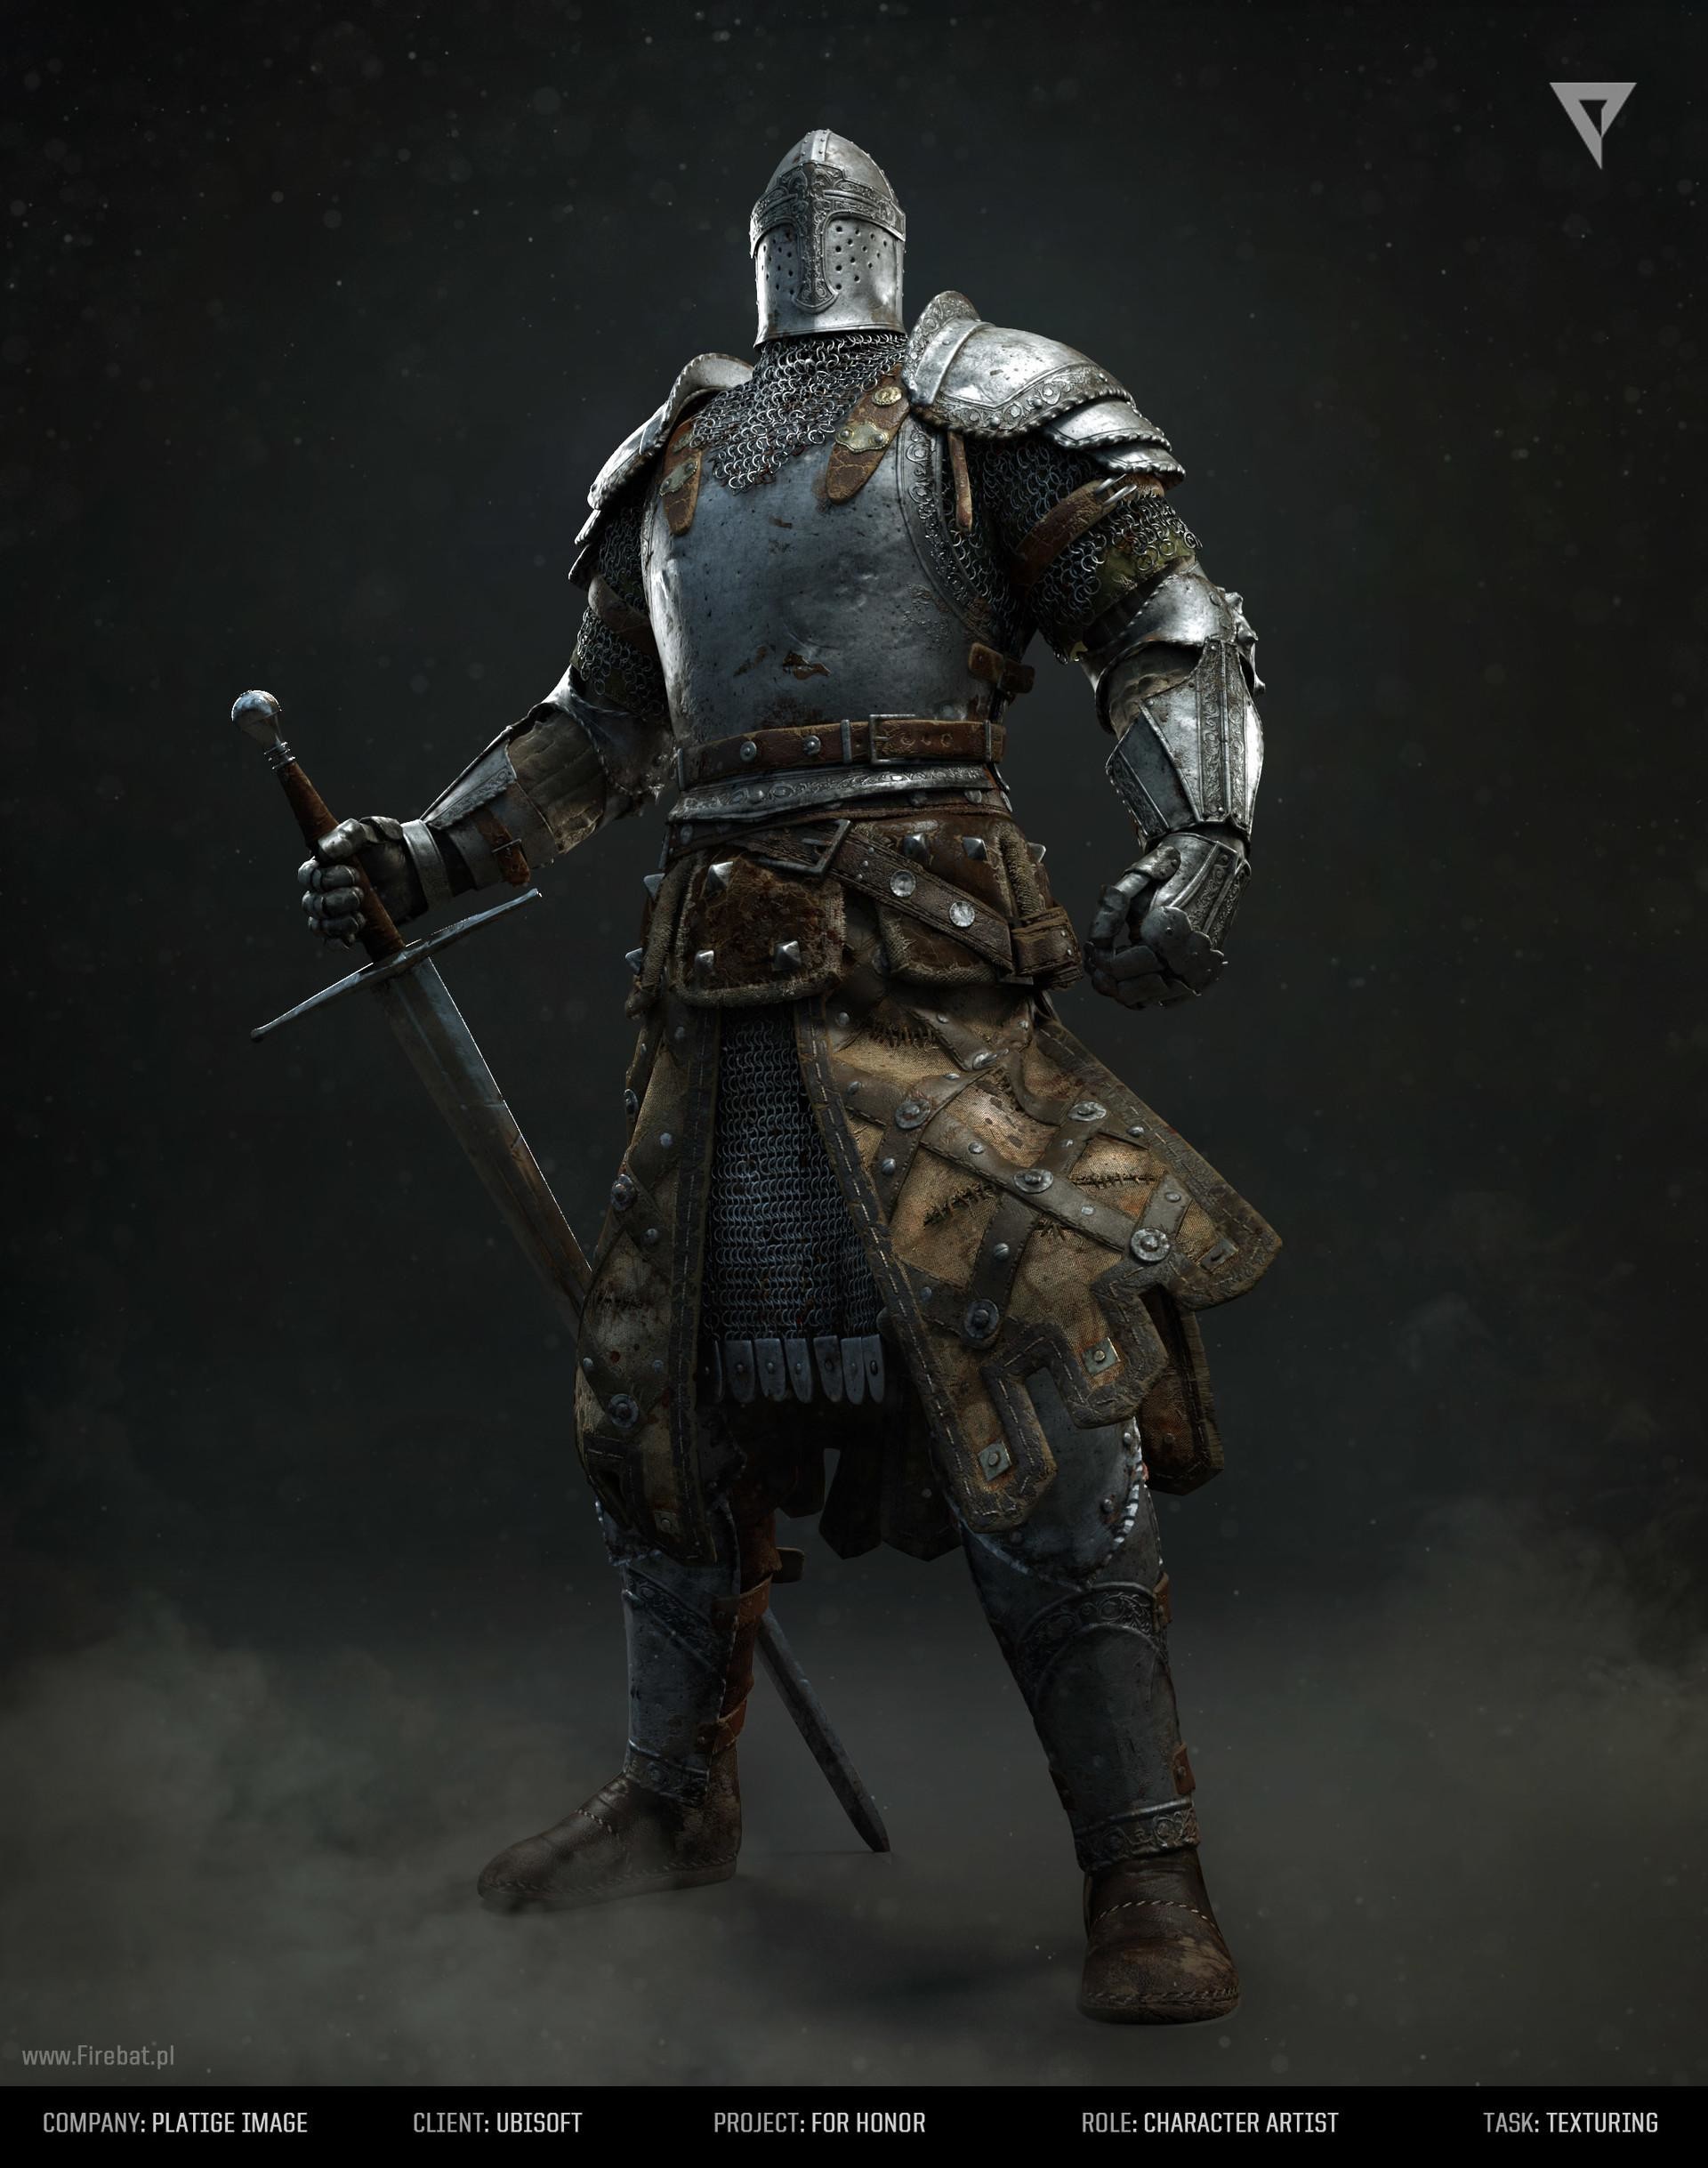 For Honor Iphone Wallpaper - Medieval Knight Pose - HD Wallpaper 